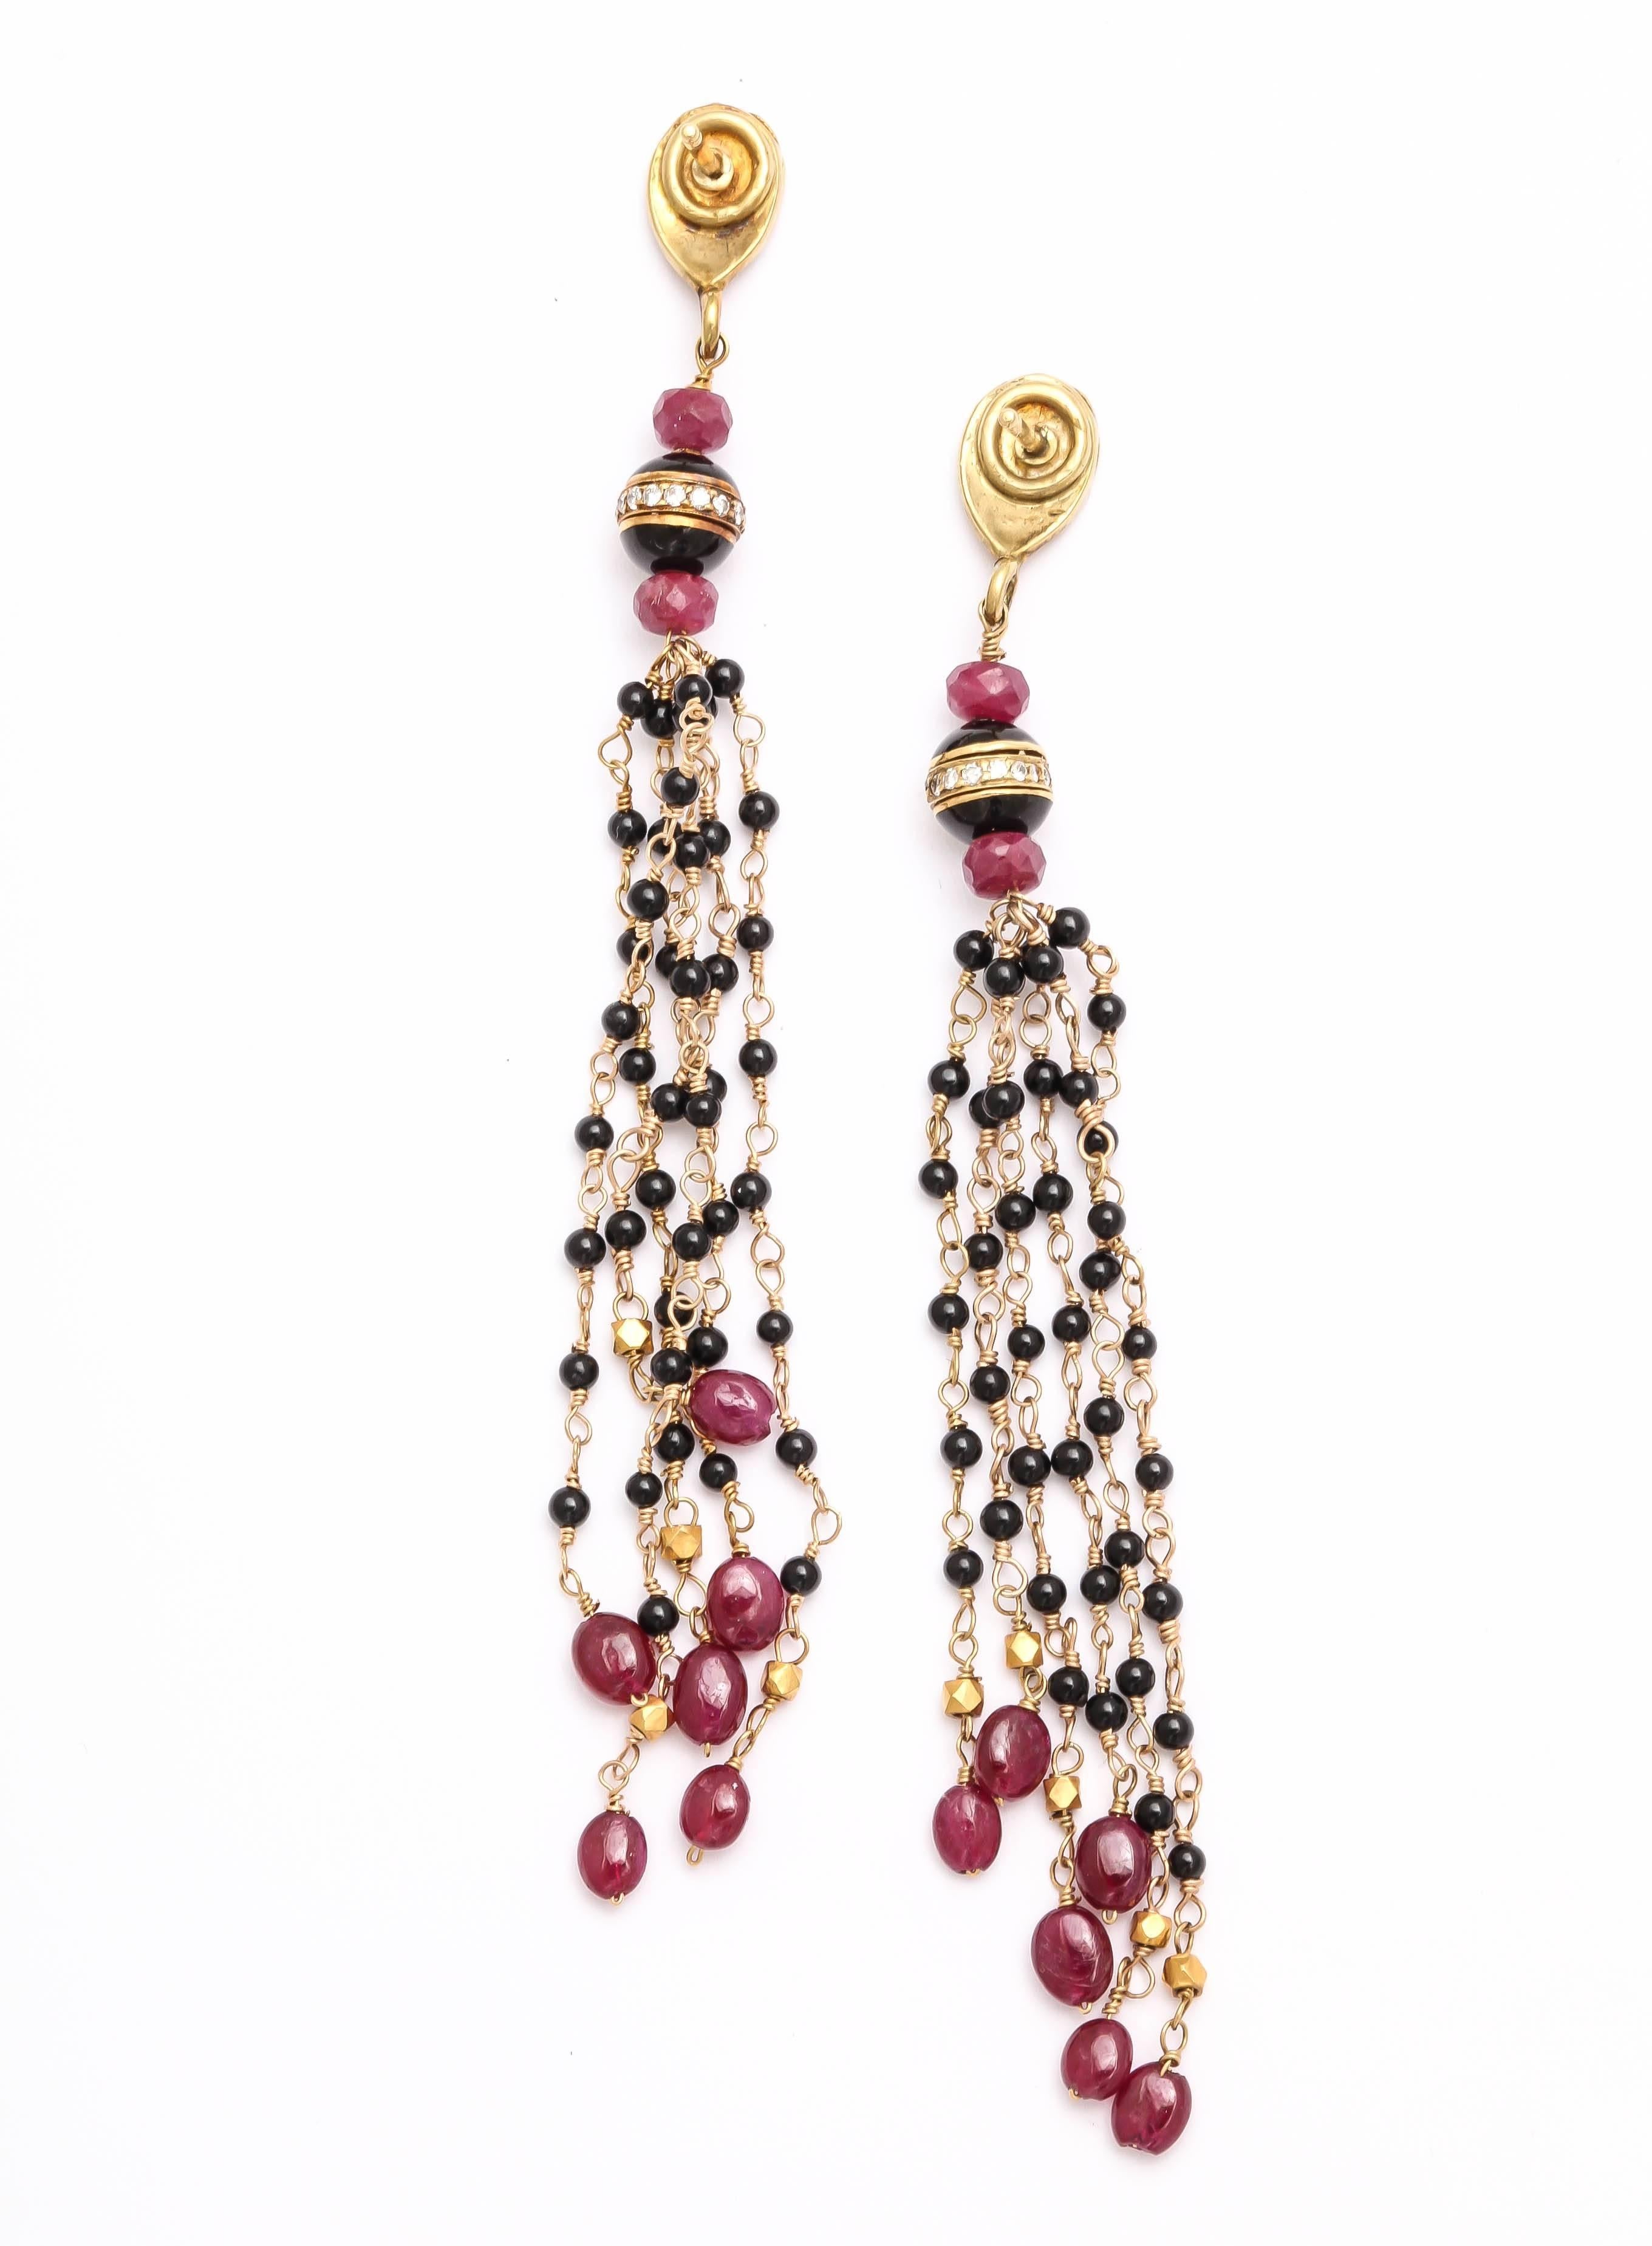 Equisite Handmade Ruby and Black Onyx Dangle Earrings For Sale 2